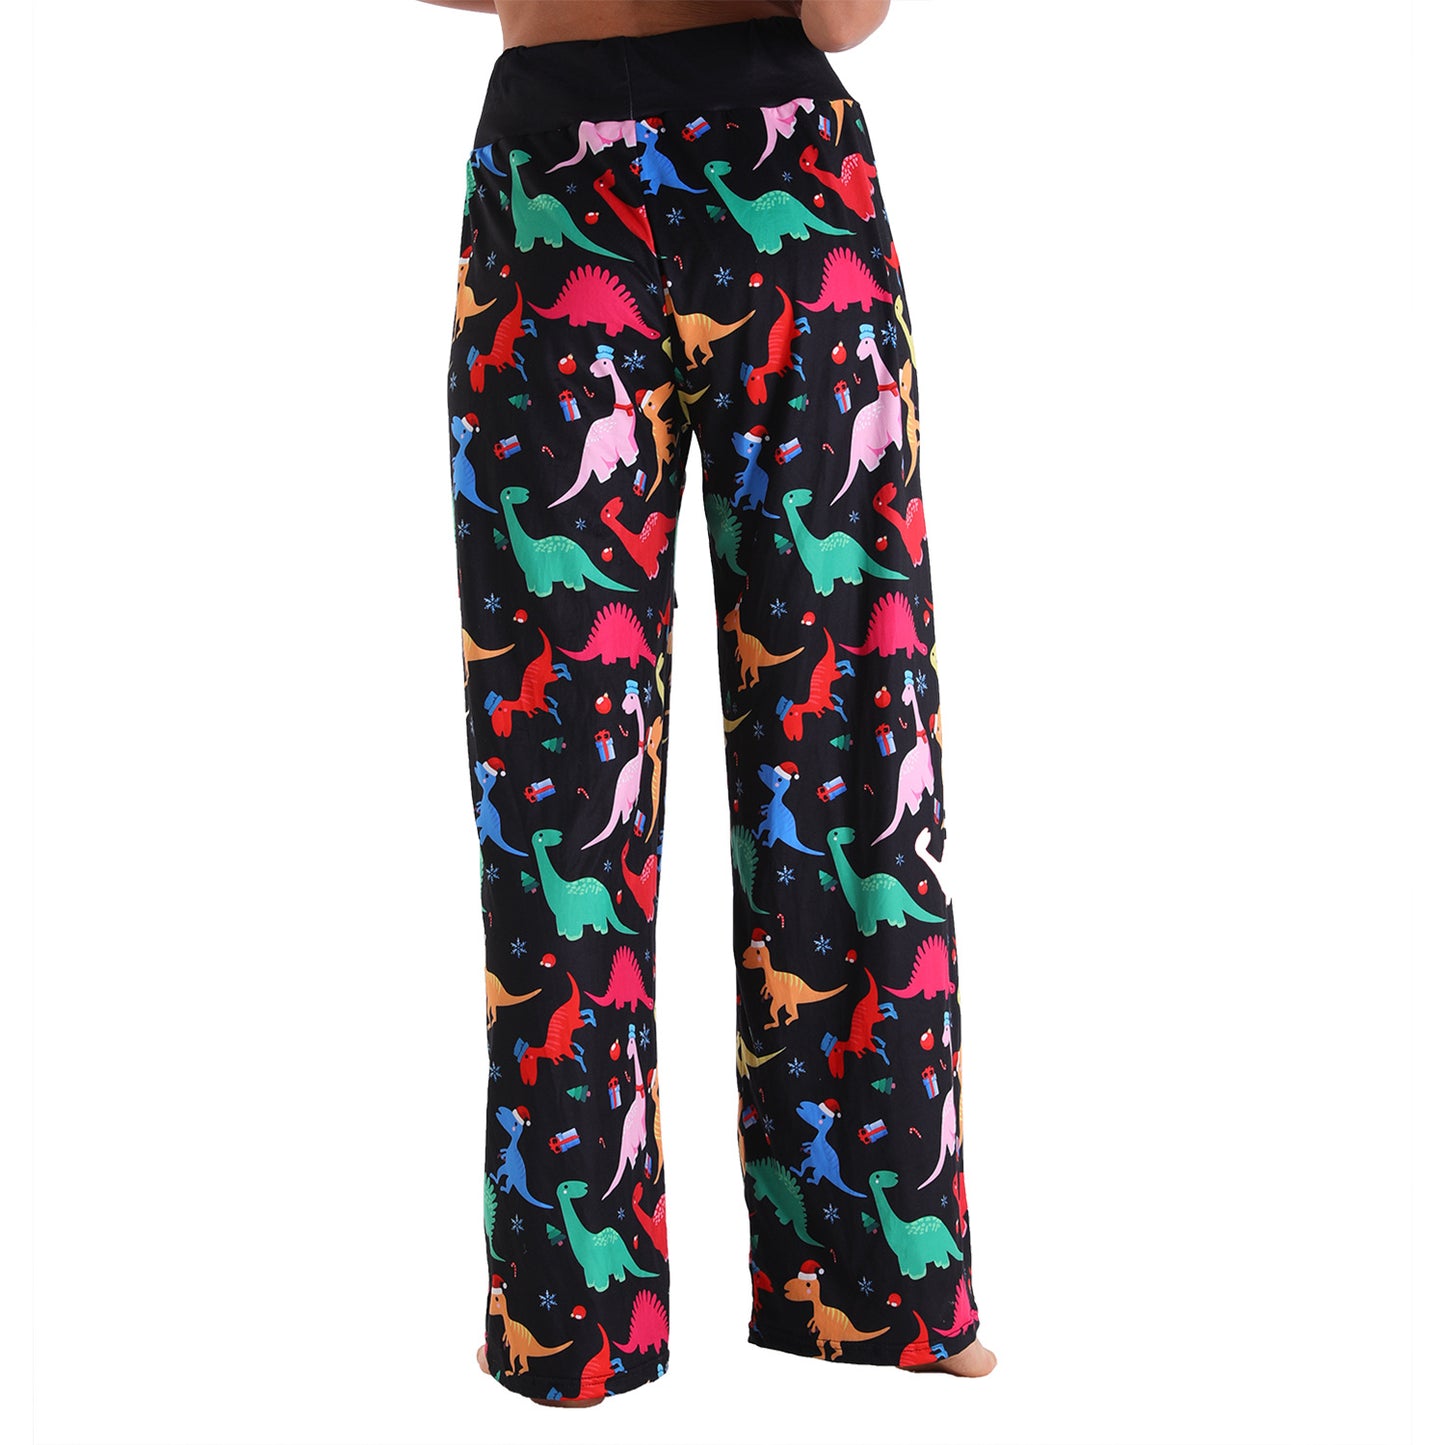 Casual Floral Print Women High Waist Trousers-Pajamas-Free Shipping at meselling99